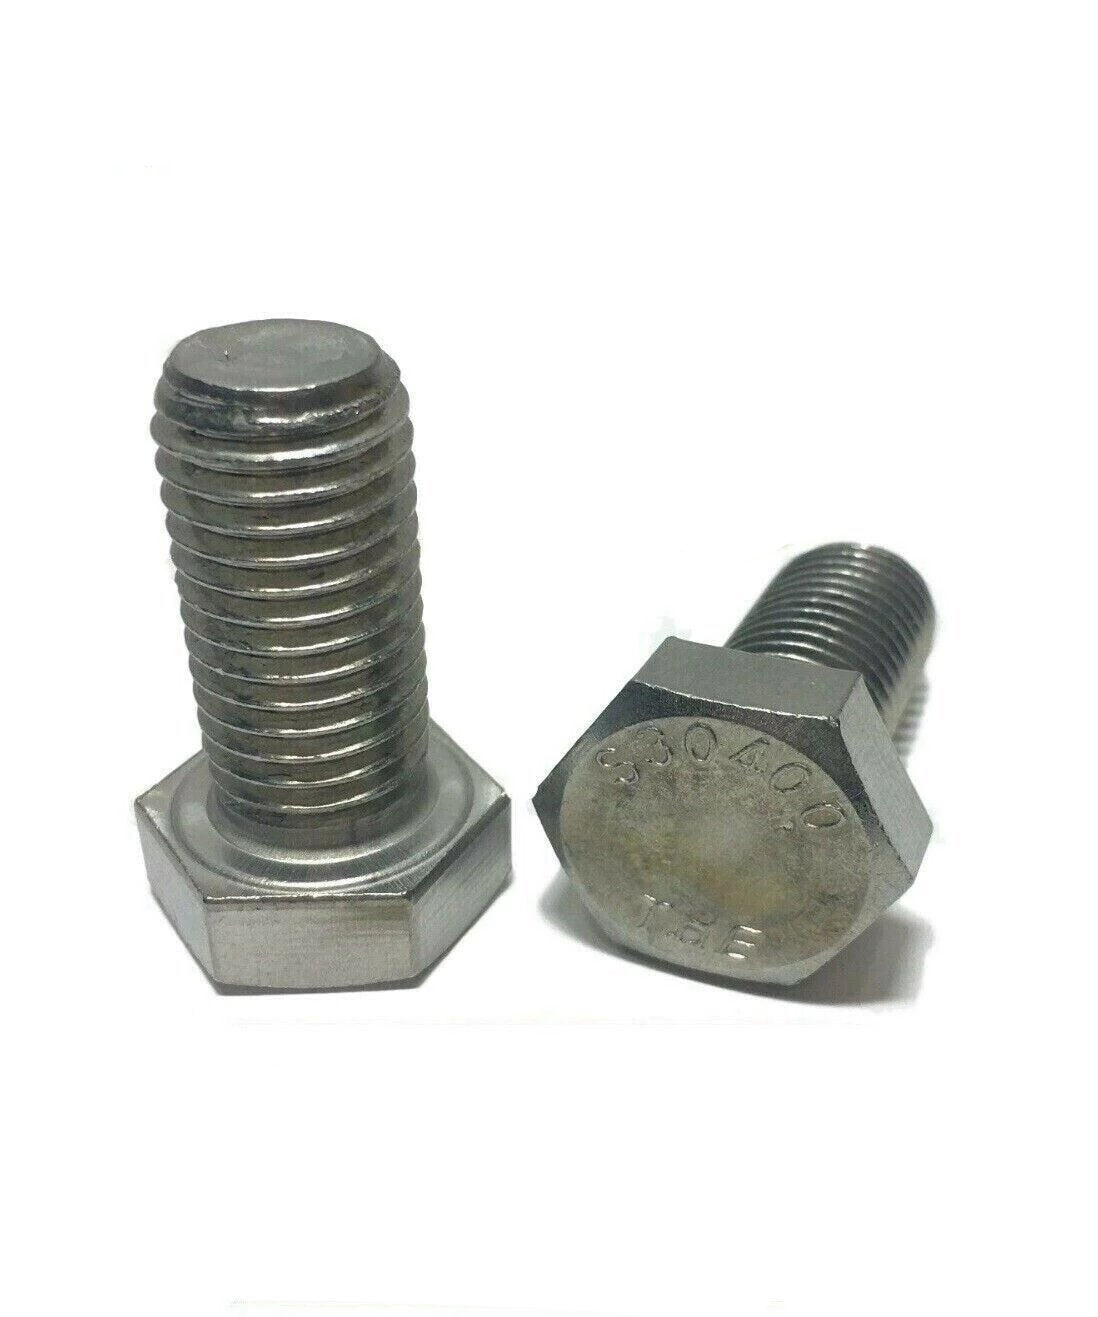 7/16"-14 x 1 1/4" Stainless Steel Hex Cap Screw / Tap Bolt 18-8 / 304